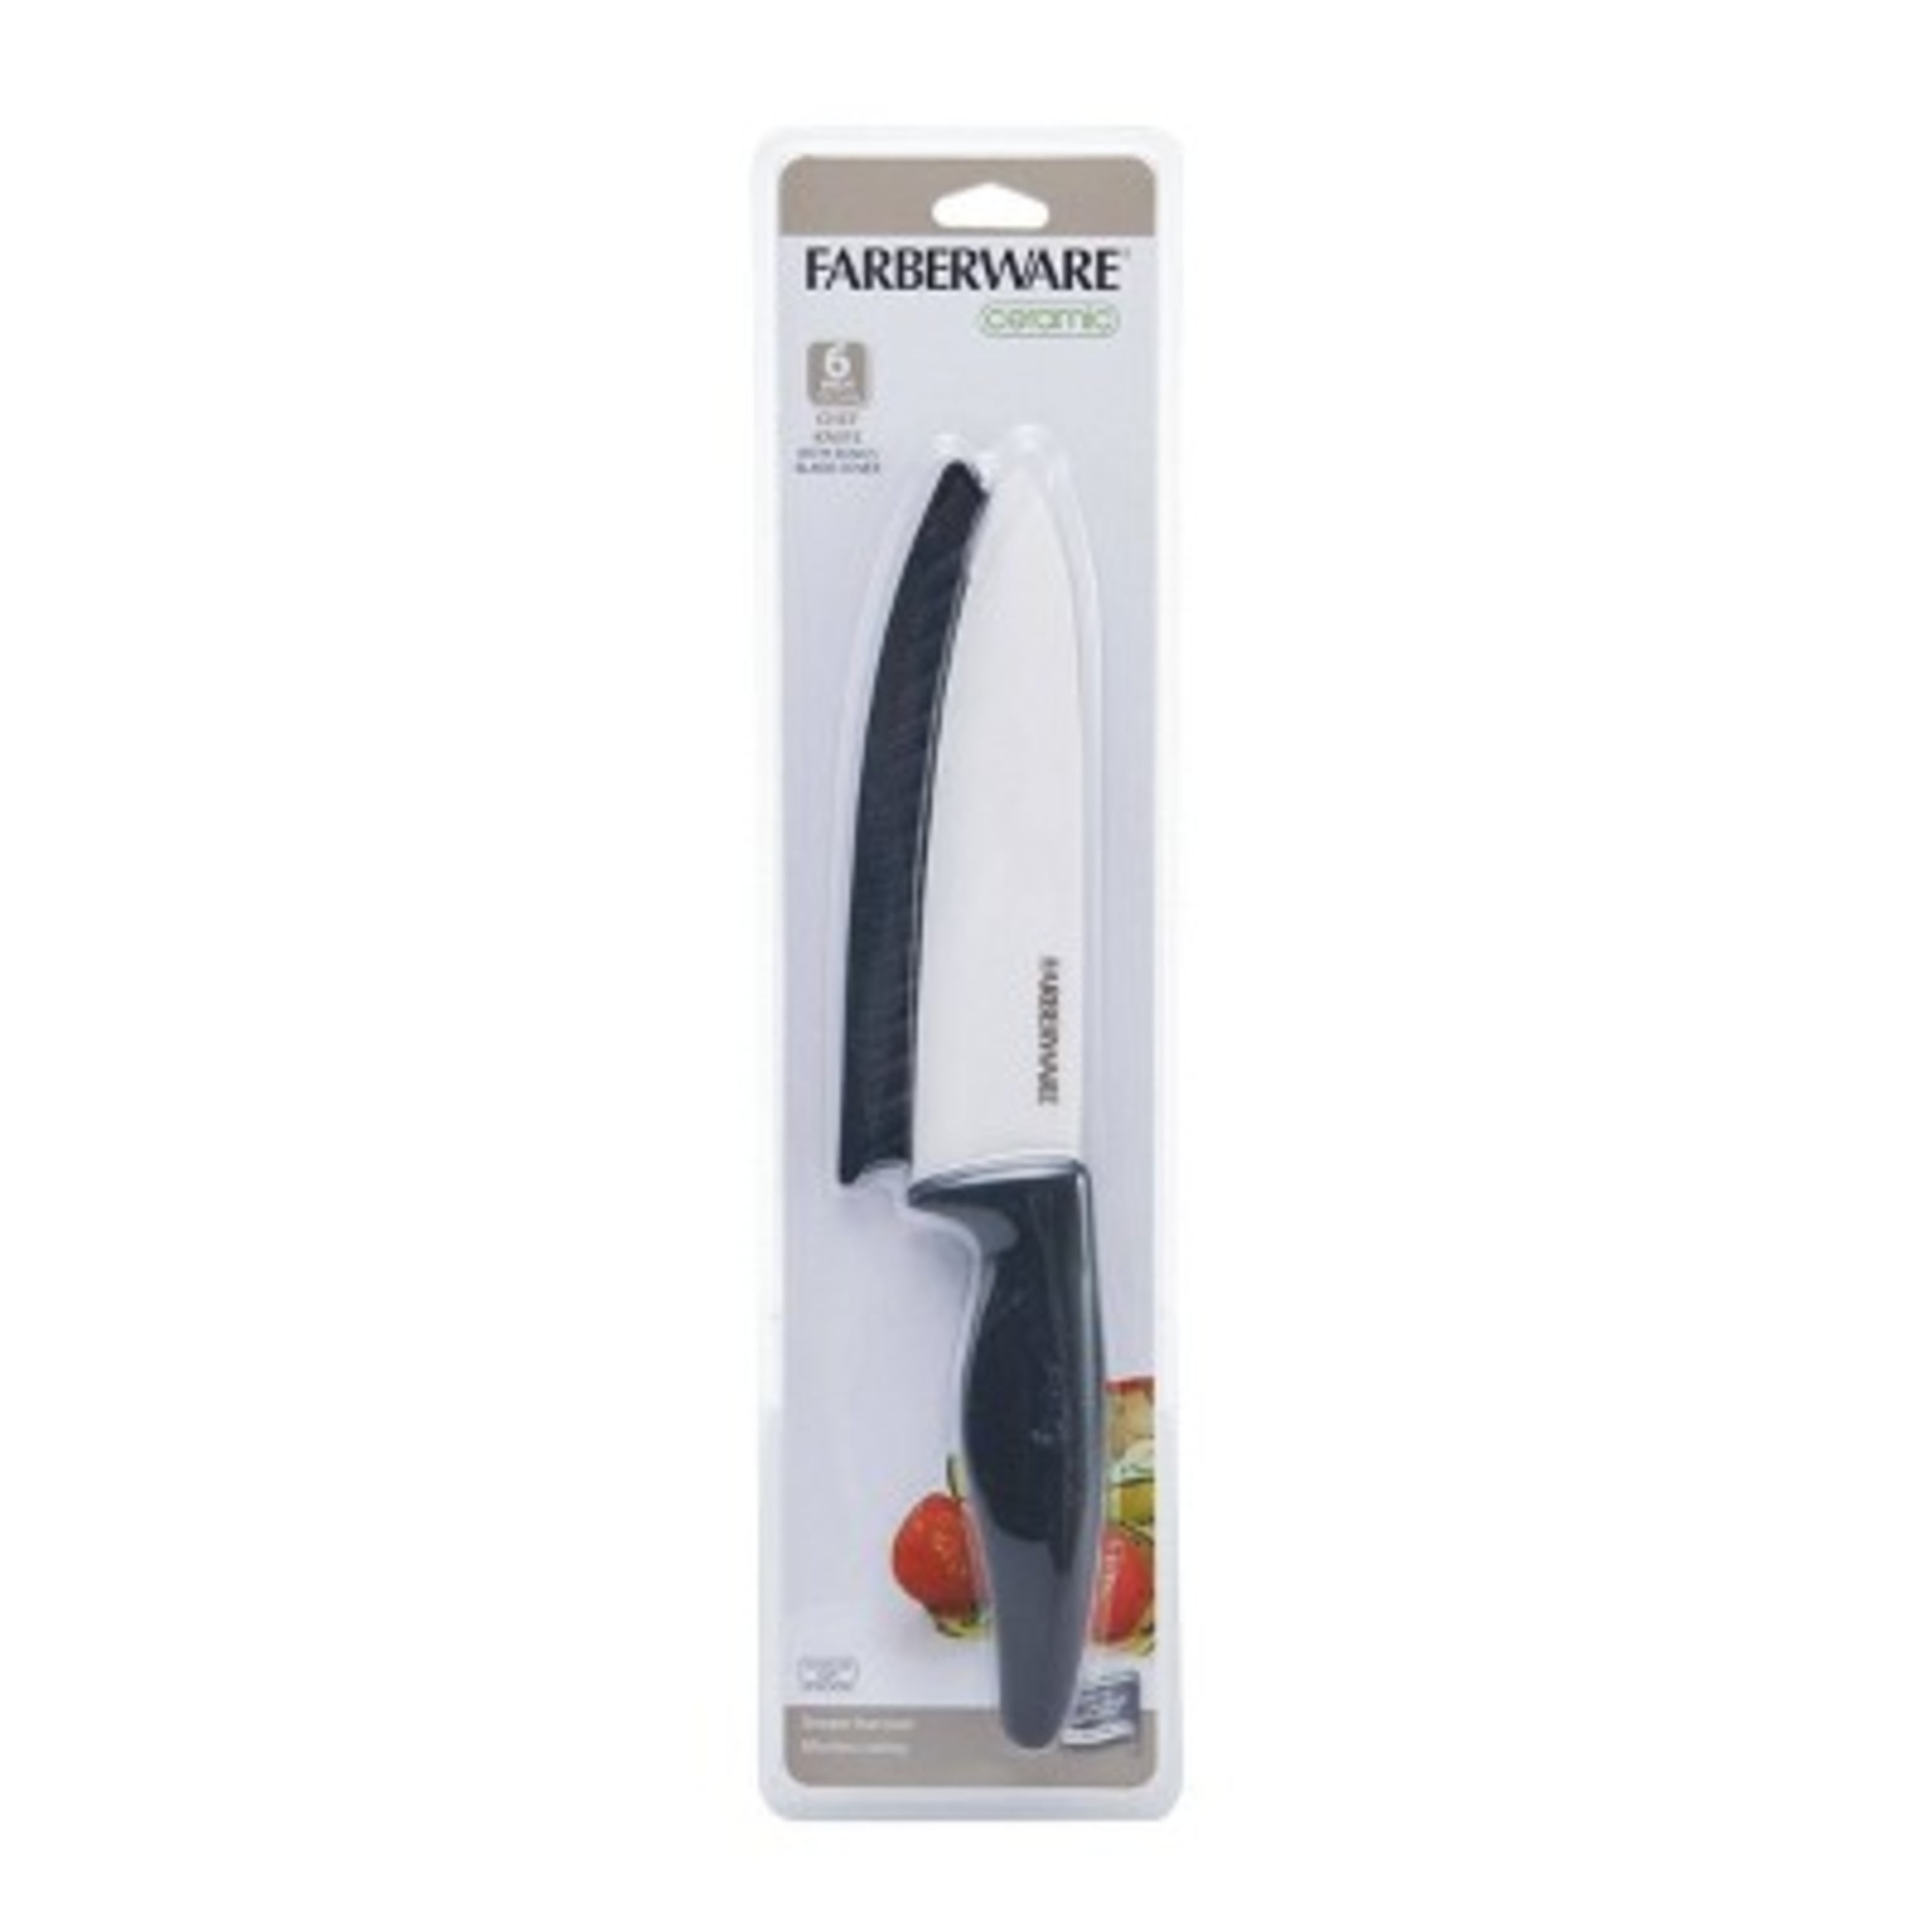 Farberware Professional Ceramic Utility Knife with Red Blade Cover & Handle - 5 in